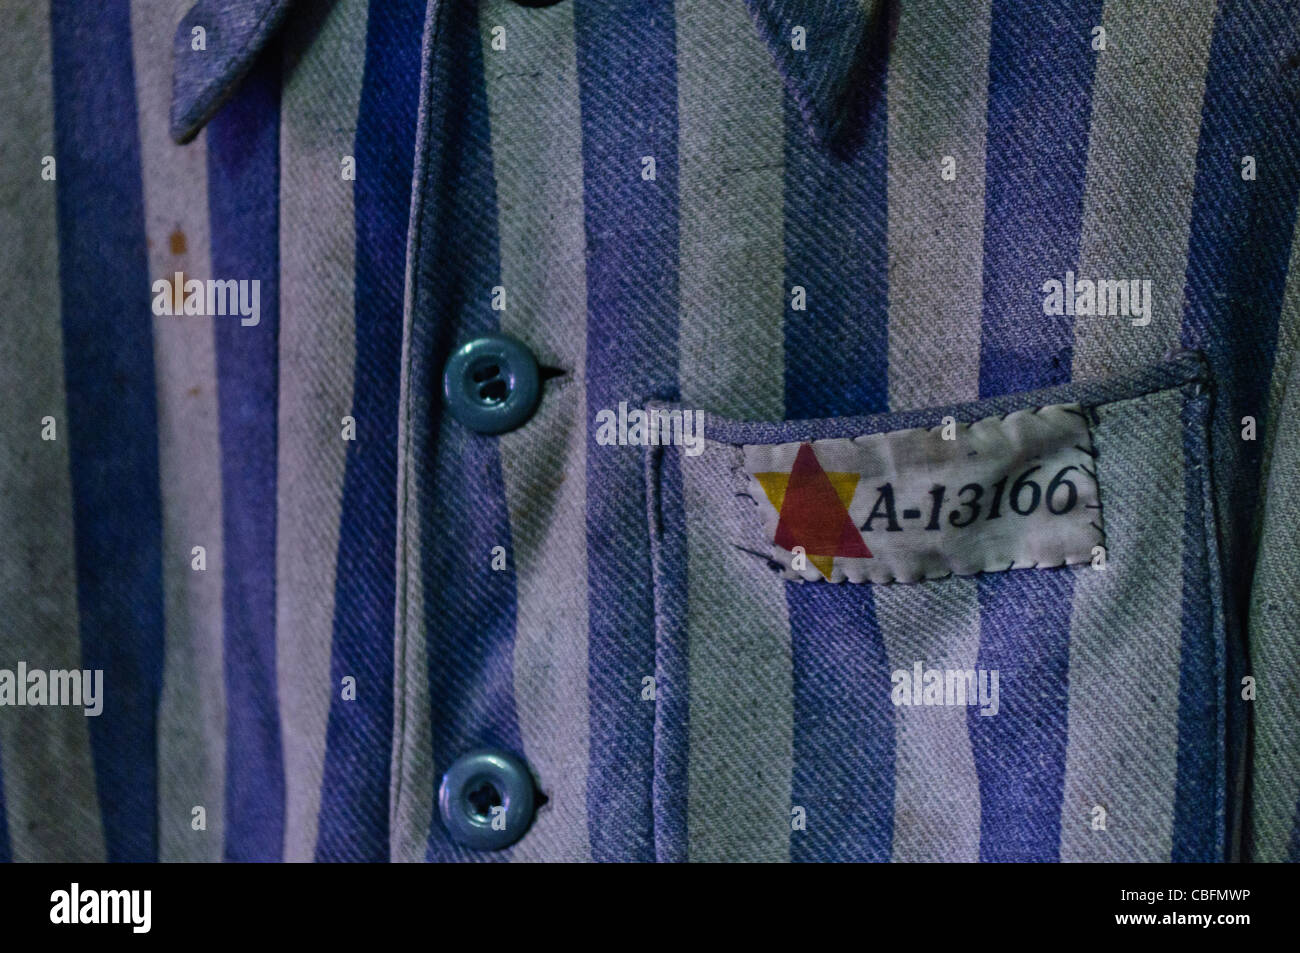 Uniform of a Jewish prisoner at Auschwitz I Nazi concentration camp showing yellow and red triangles Stock Photo